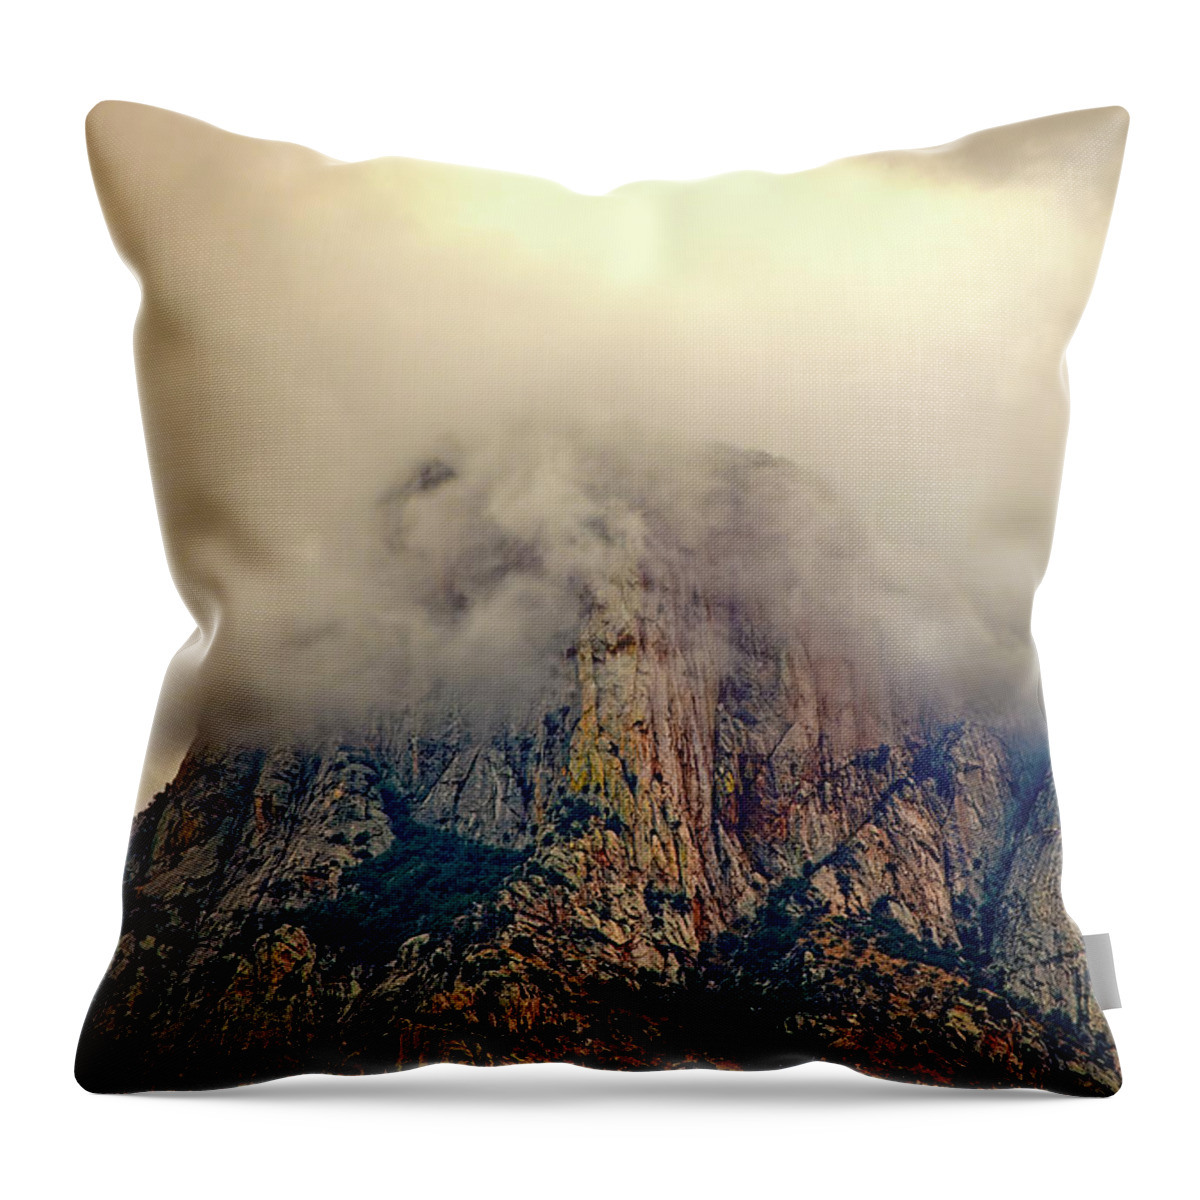 Fog Throw Pillow featuring the photograph Table Mountain In Clouds 24987 by Mark Myhaver